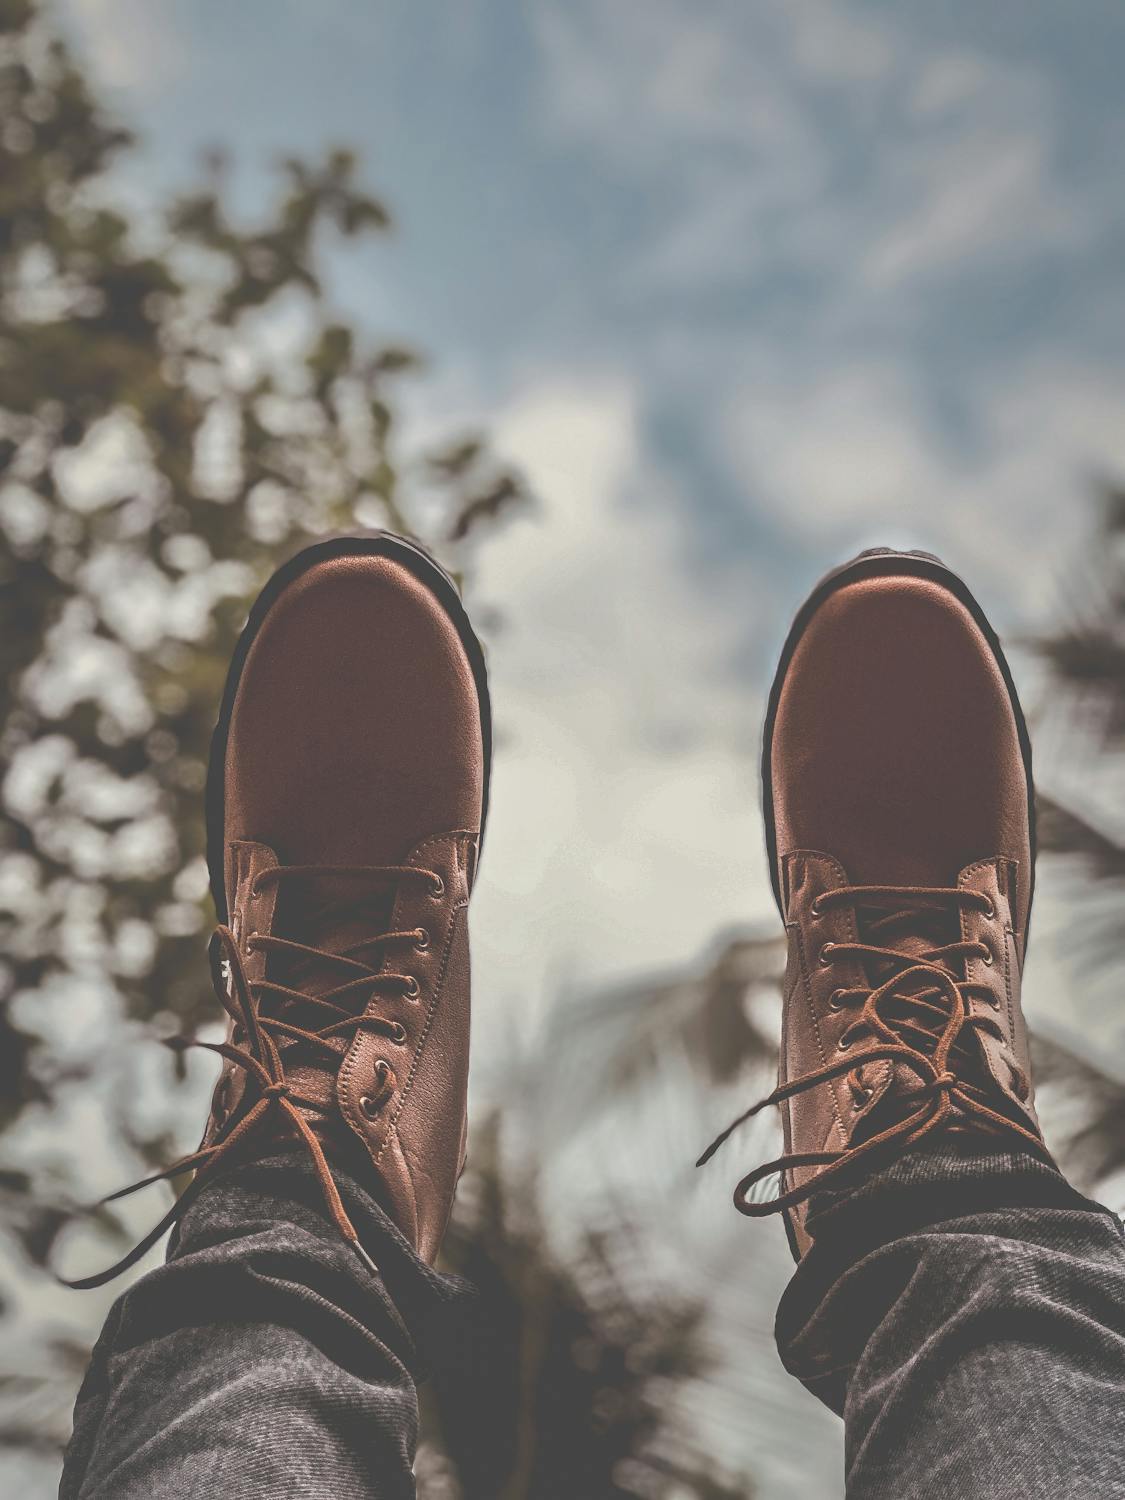 Person Wearing Brown Leather Boots · Free Stock Photo